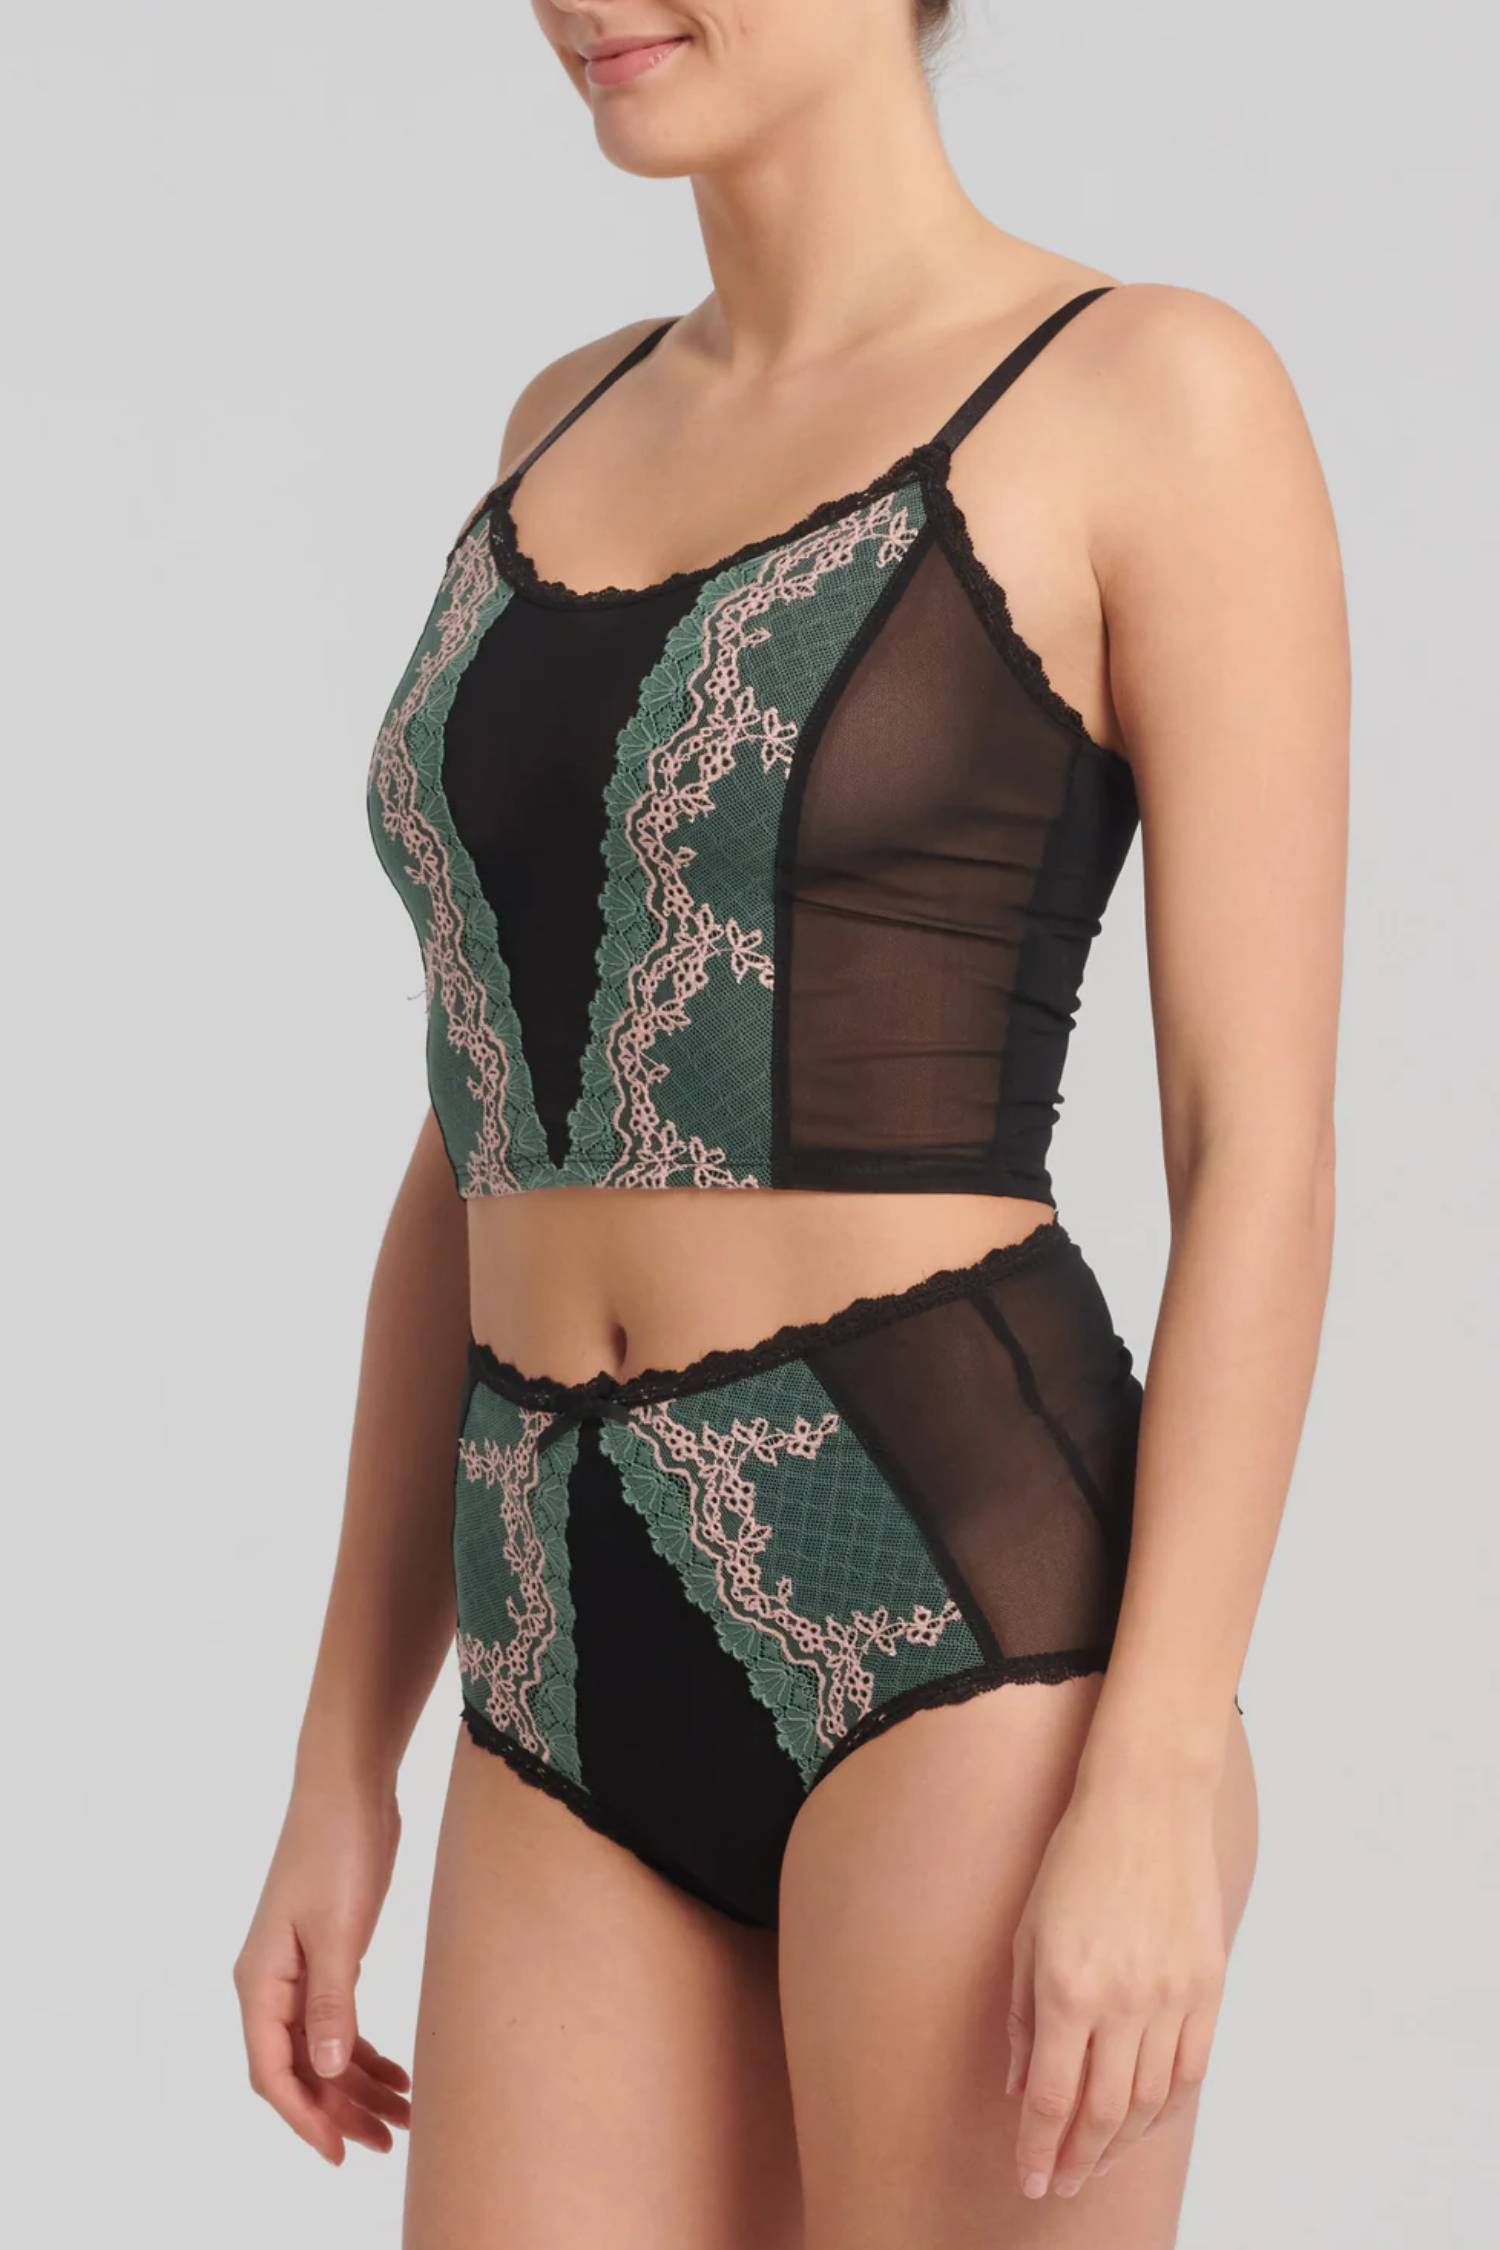 Iphigenia Bustier by Kollontai, Green, longline bralette, spaghetti straps, mesh and lace, sizes XS to XL, made in Montreal 